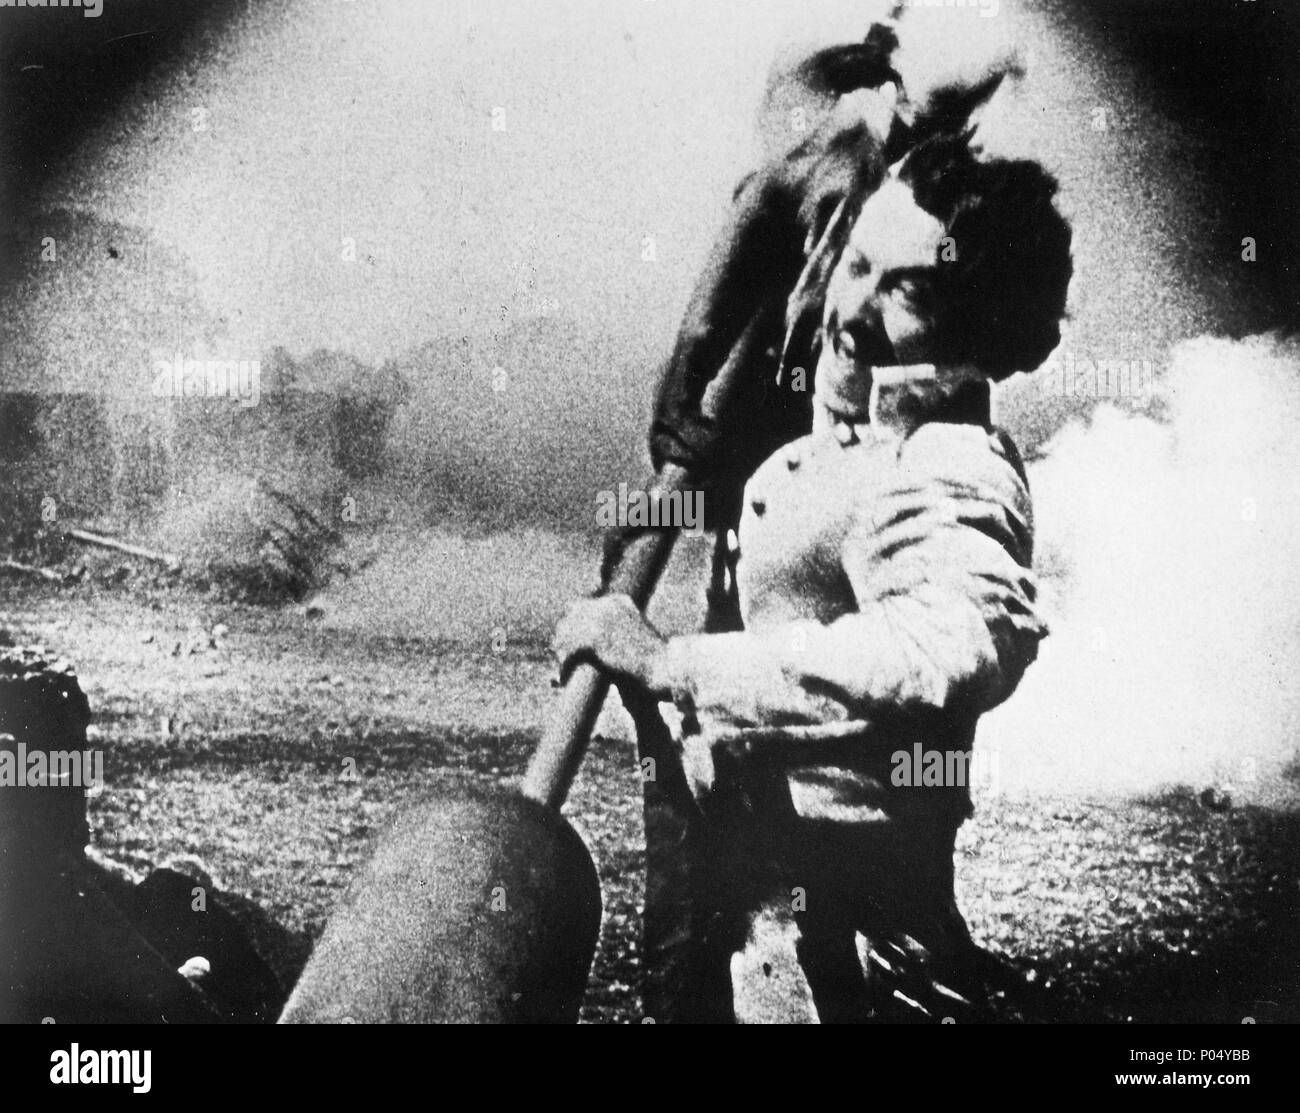 Original Film Title: THE BIRTH OF A NATION.  English Title: THE BIRTH OF A NATION.  Film Director: D. W. GRIFFITH.  Year: 1915.  Stars: HENRY B. WALTHALL. Credit: EPIC / Album Stock Photo